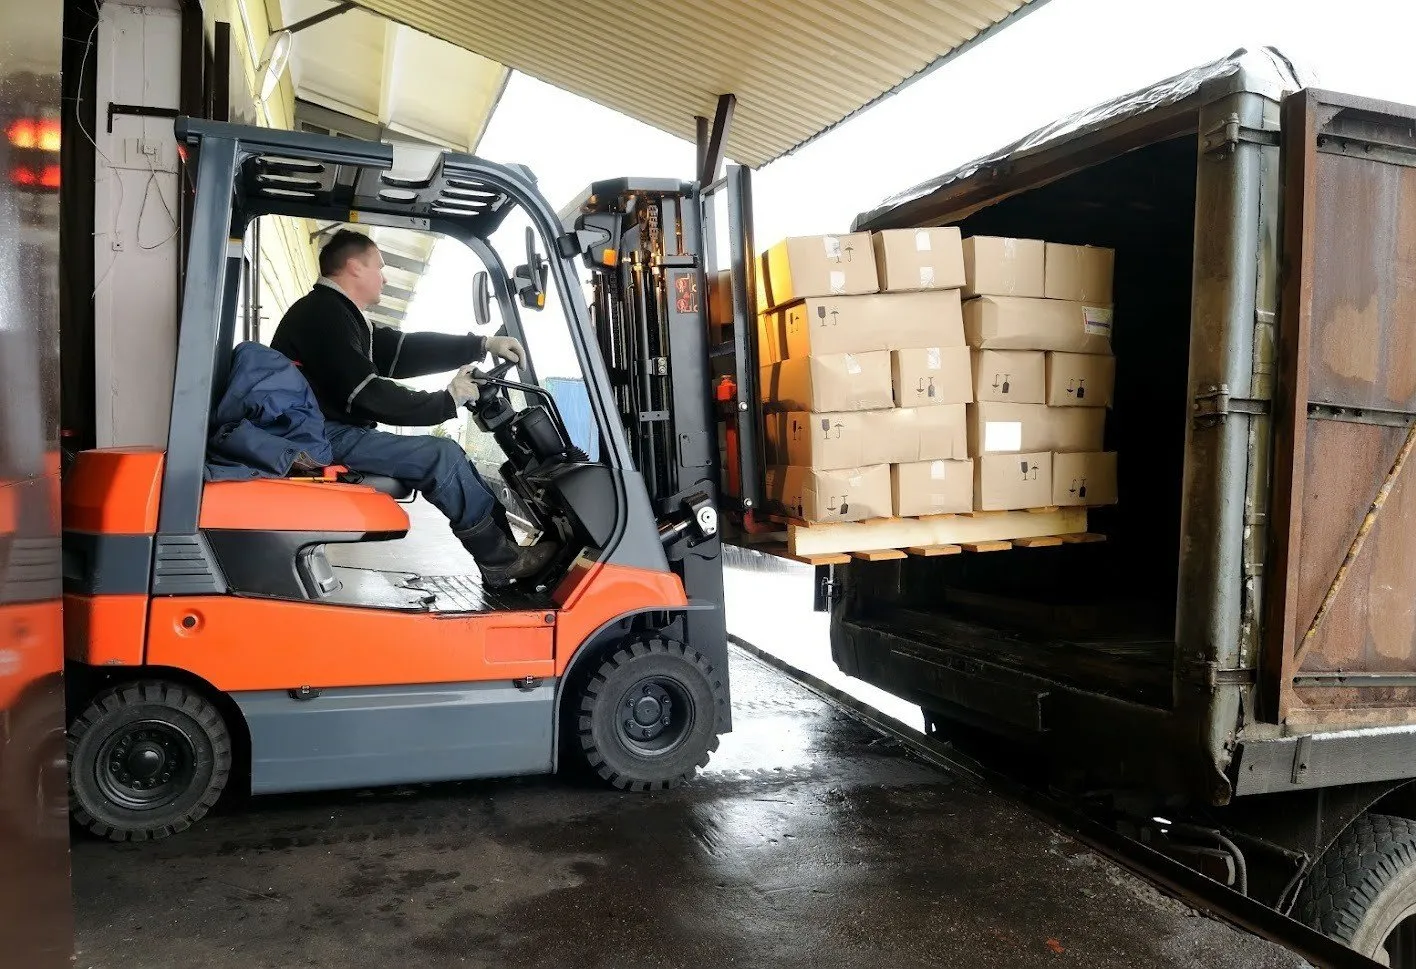 Forklift Injuries: Risks and Prevention